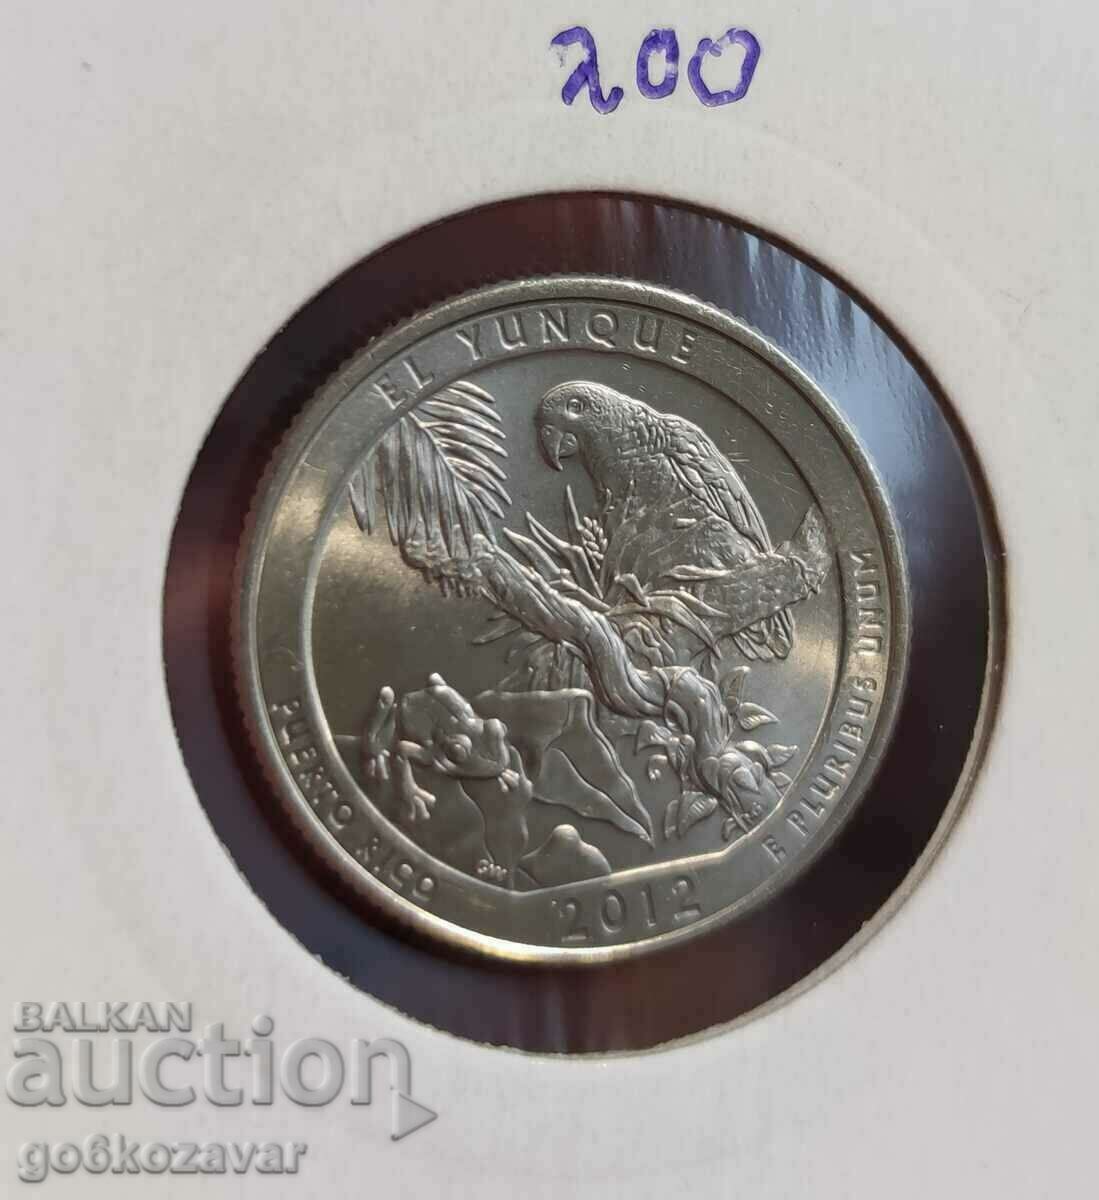 USA 25 cents 2012 Jubilee UNC